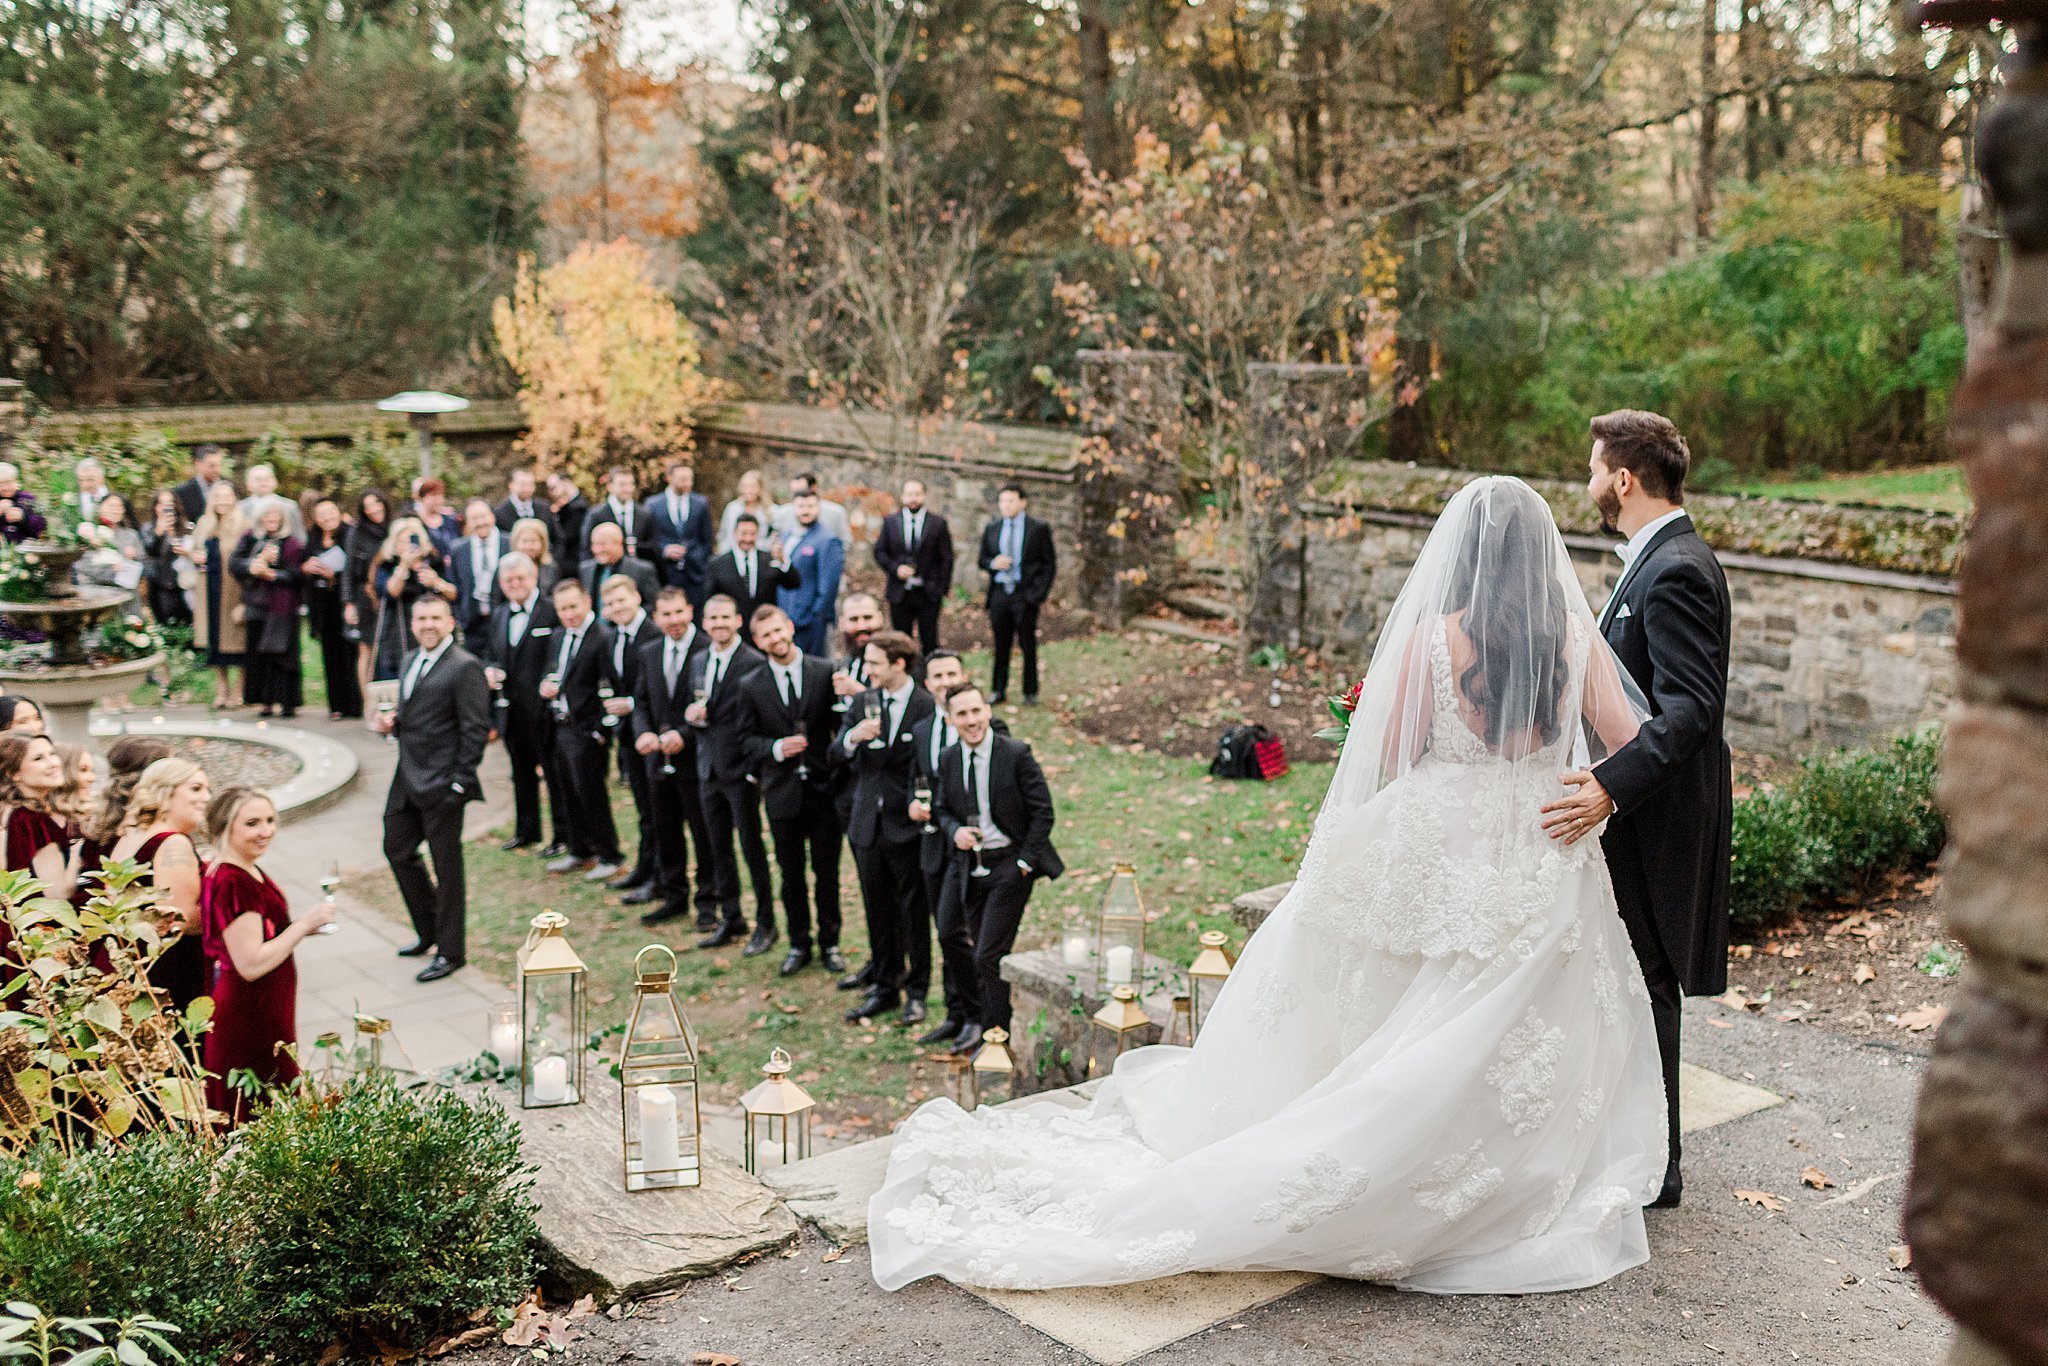 Hunting Hill Mansion Parque Ridley Creek Park Newtown Sauare PA Luxury Autumn Wedding Photography_3954.jpg